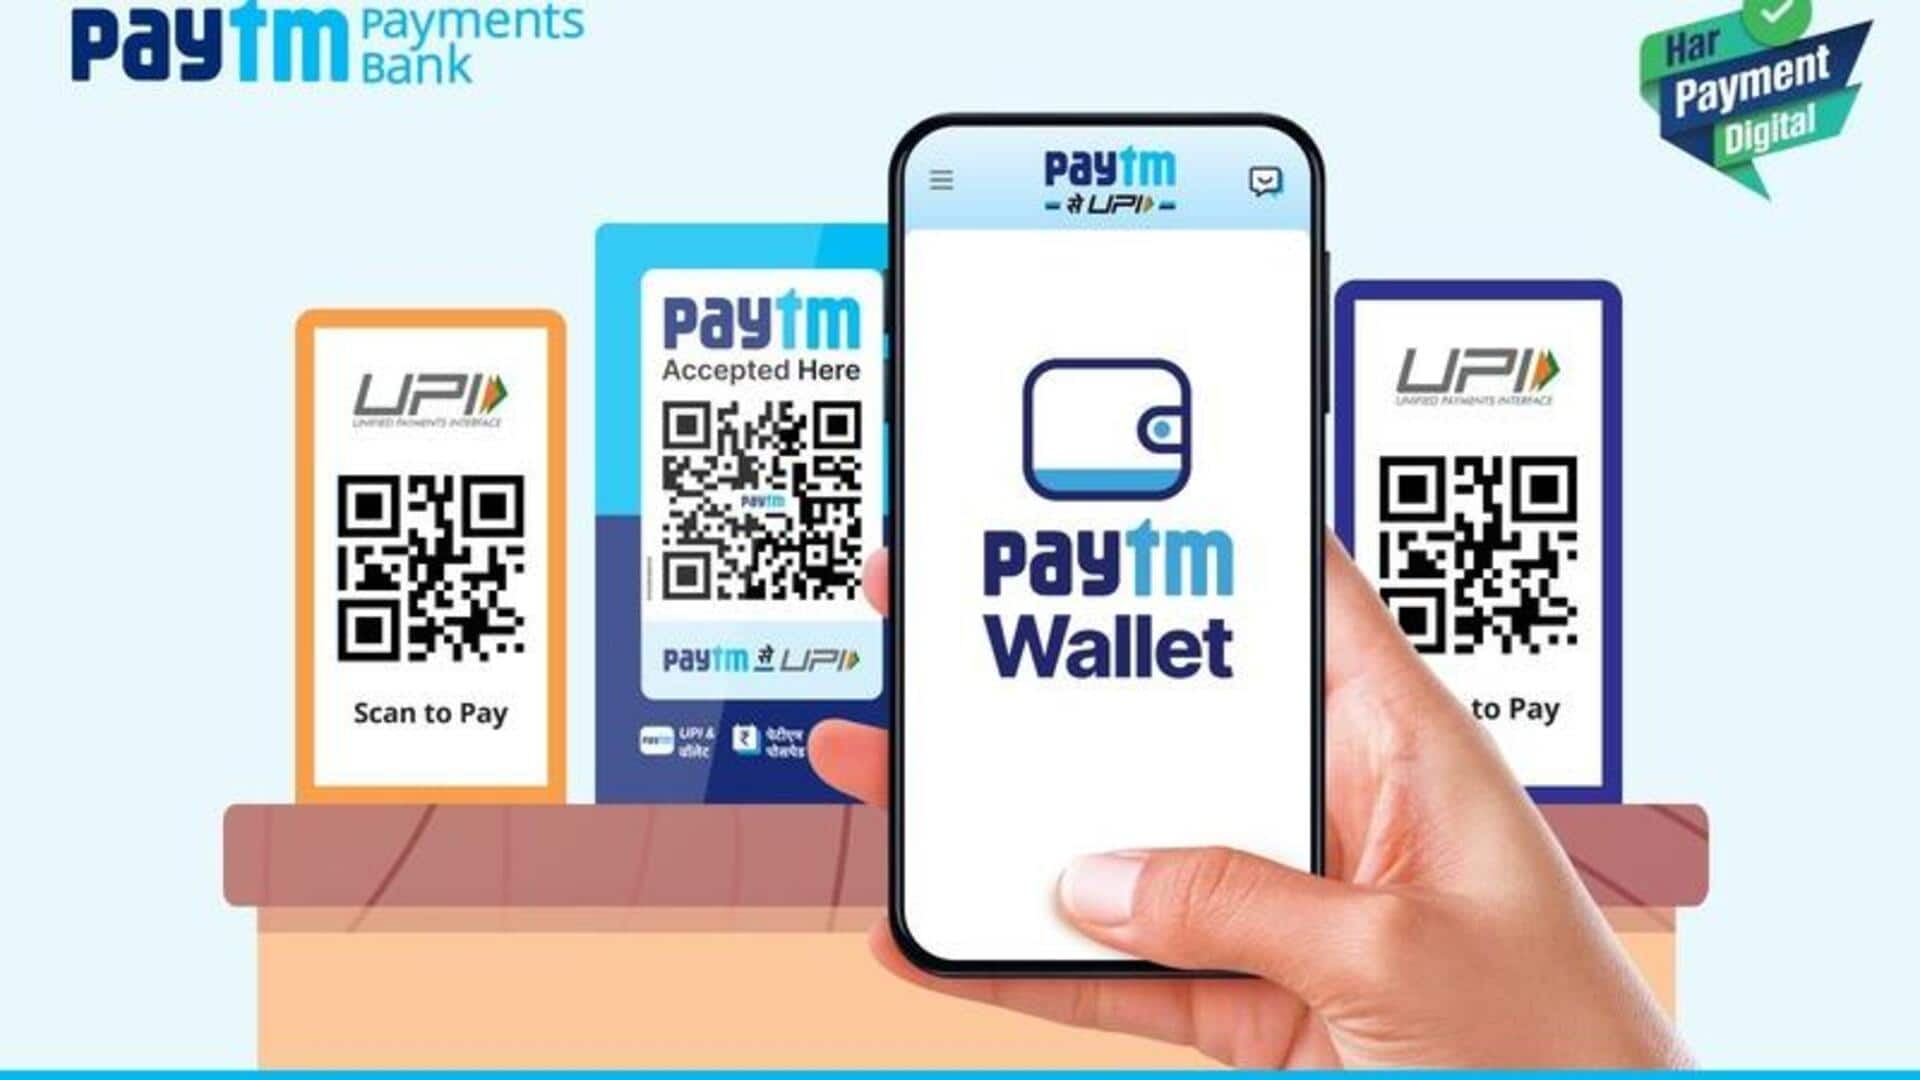 Paytm stock rises 5% after Axis Bank deal, extended deadline